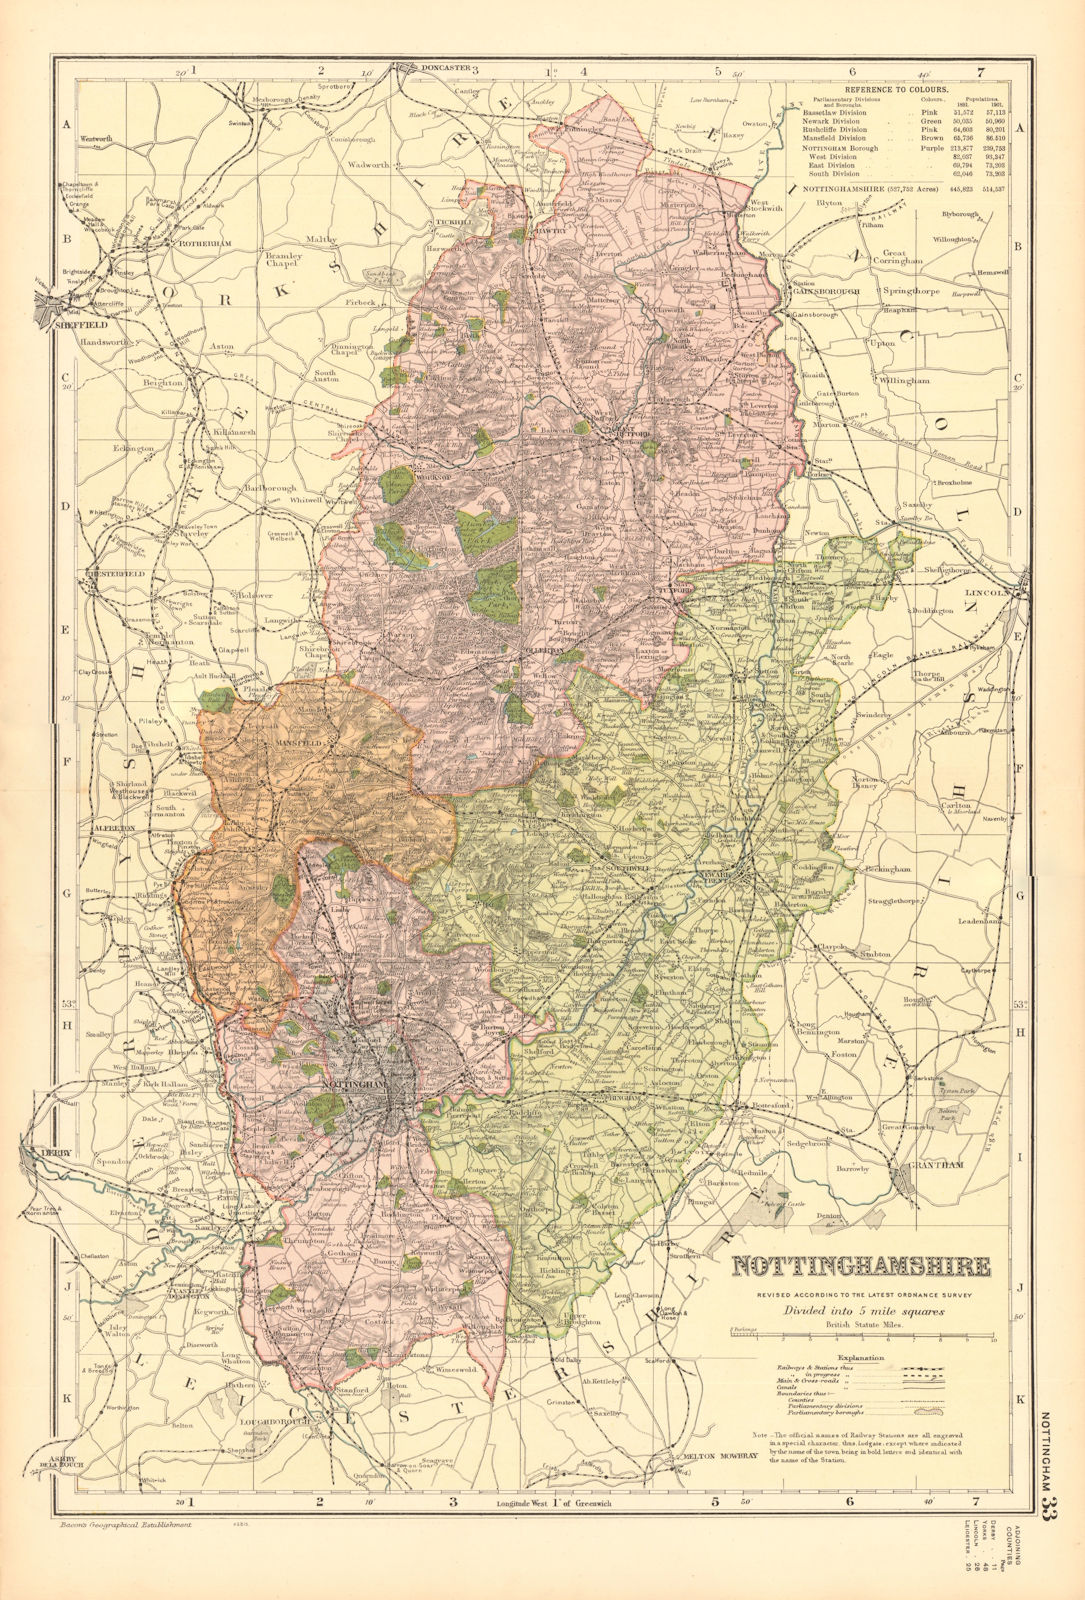 NOTTINGHAMSHIRE. Showing Parliamentary divisions,boroughs & parks.BACON 1904 map